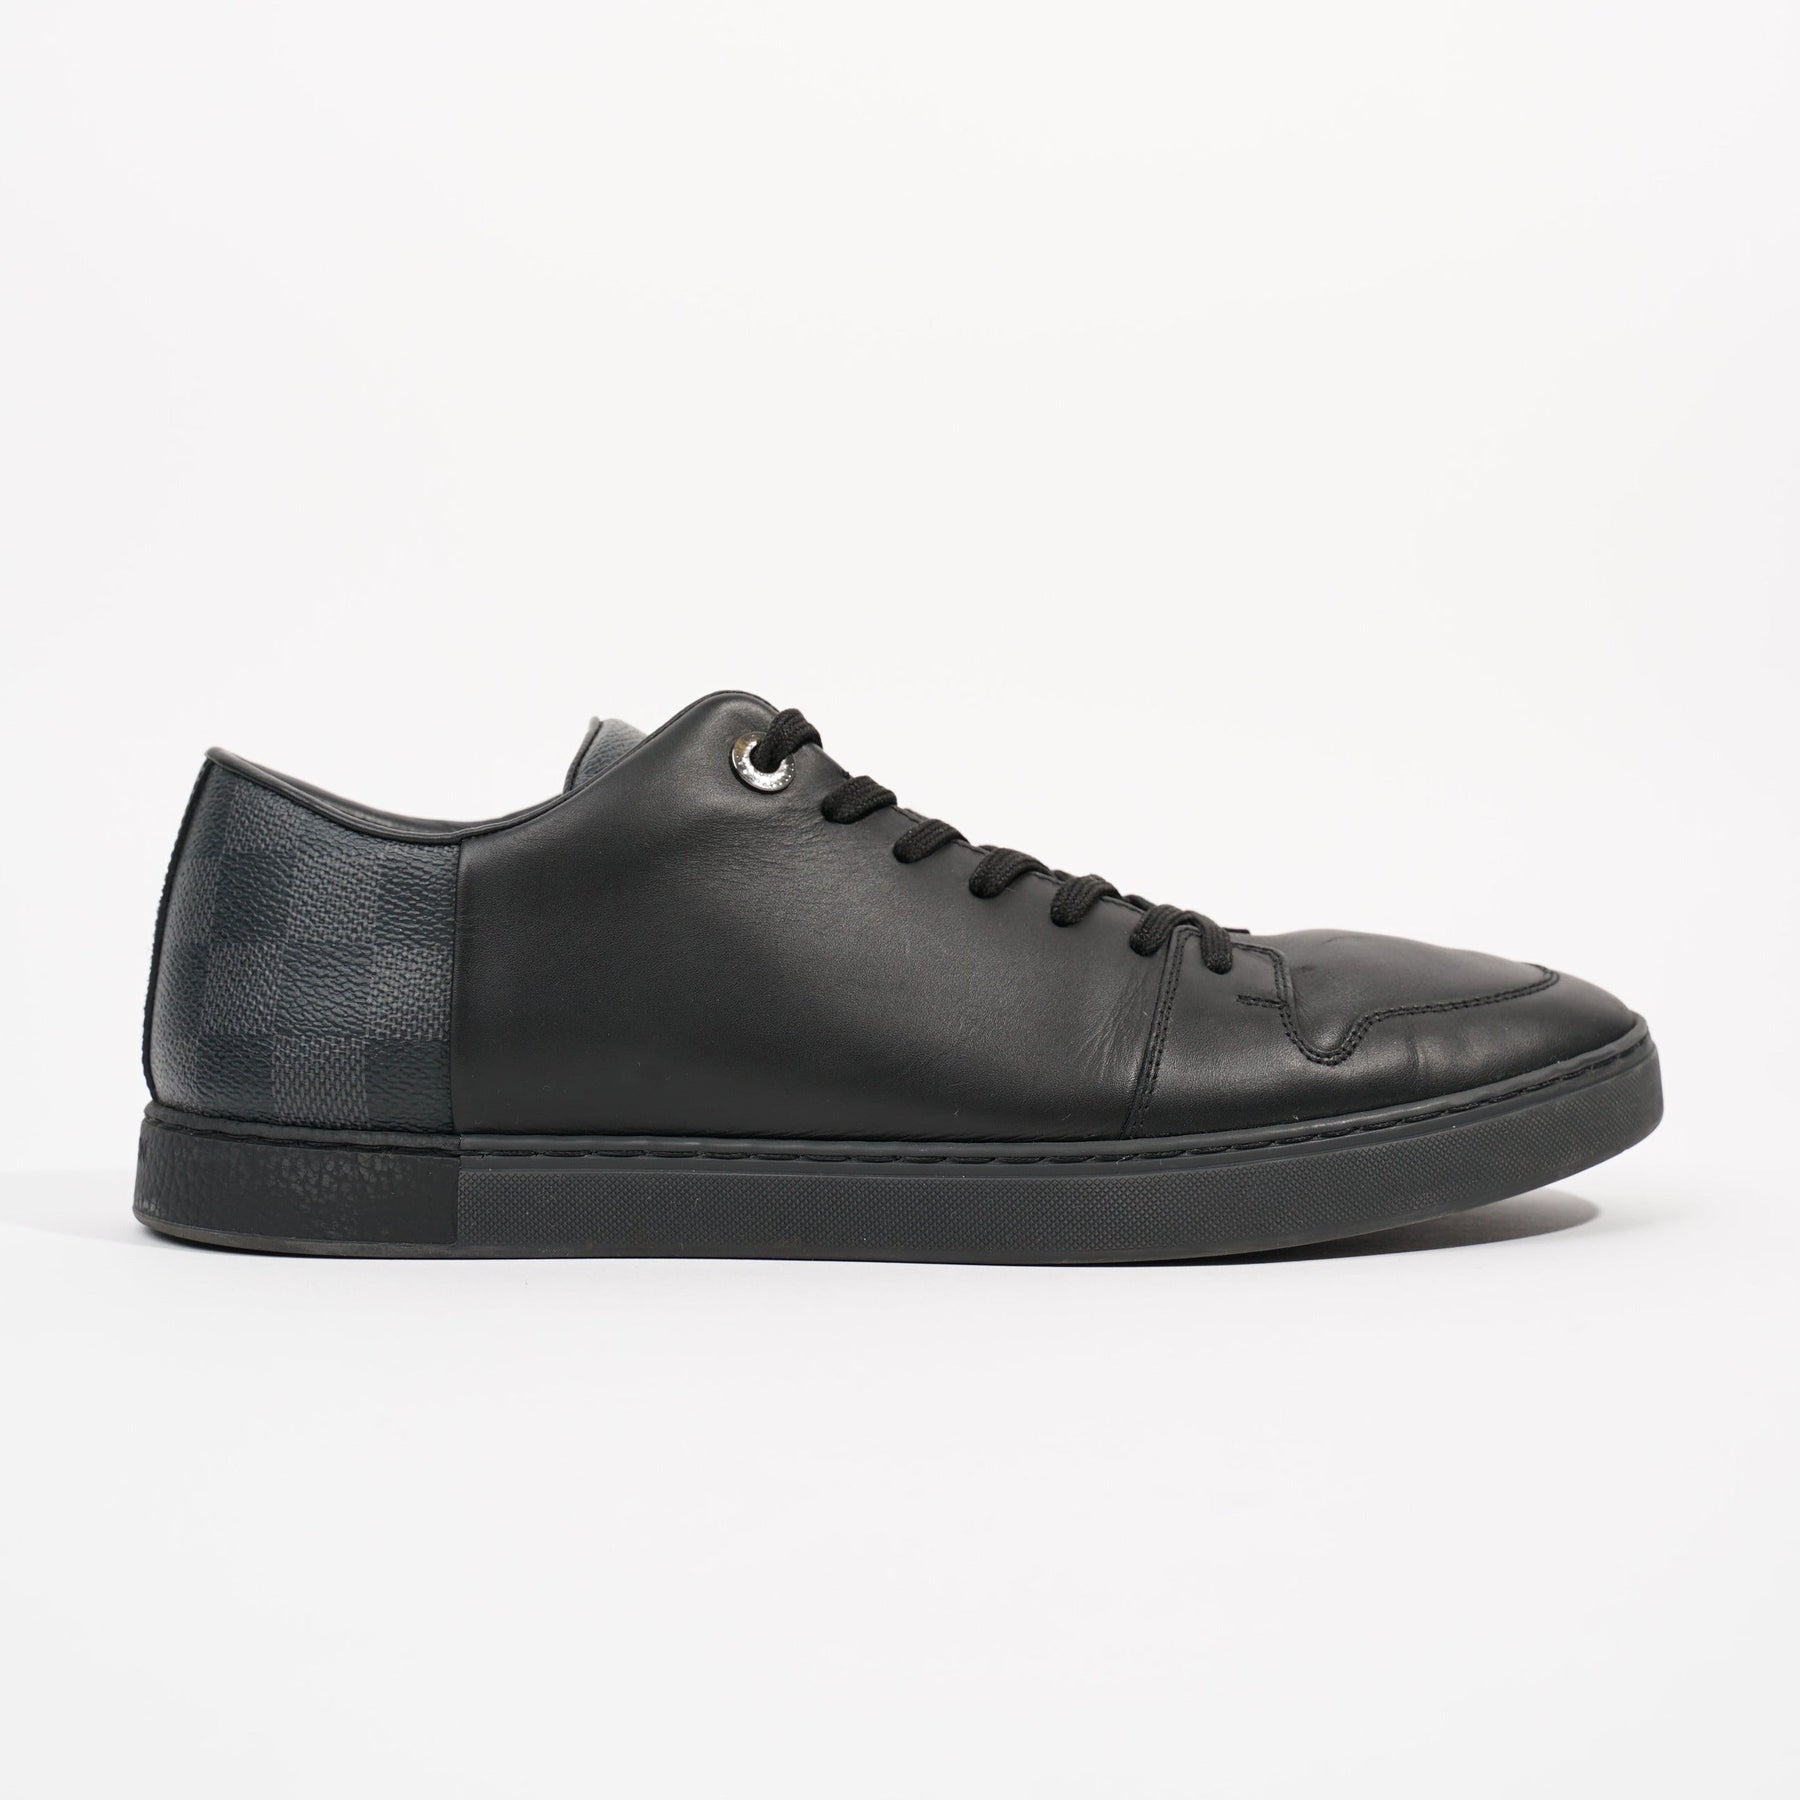 Louis Vuitton Black Leather Damier Line Up Low-top Sneakers - 41